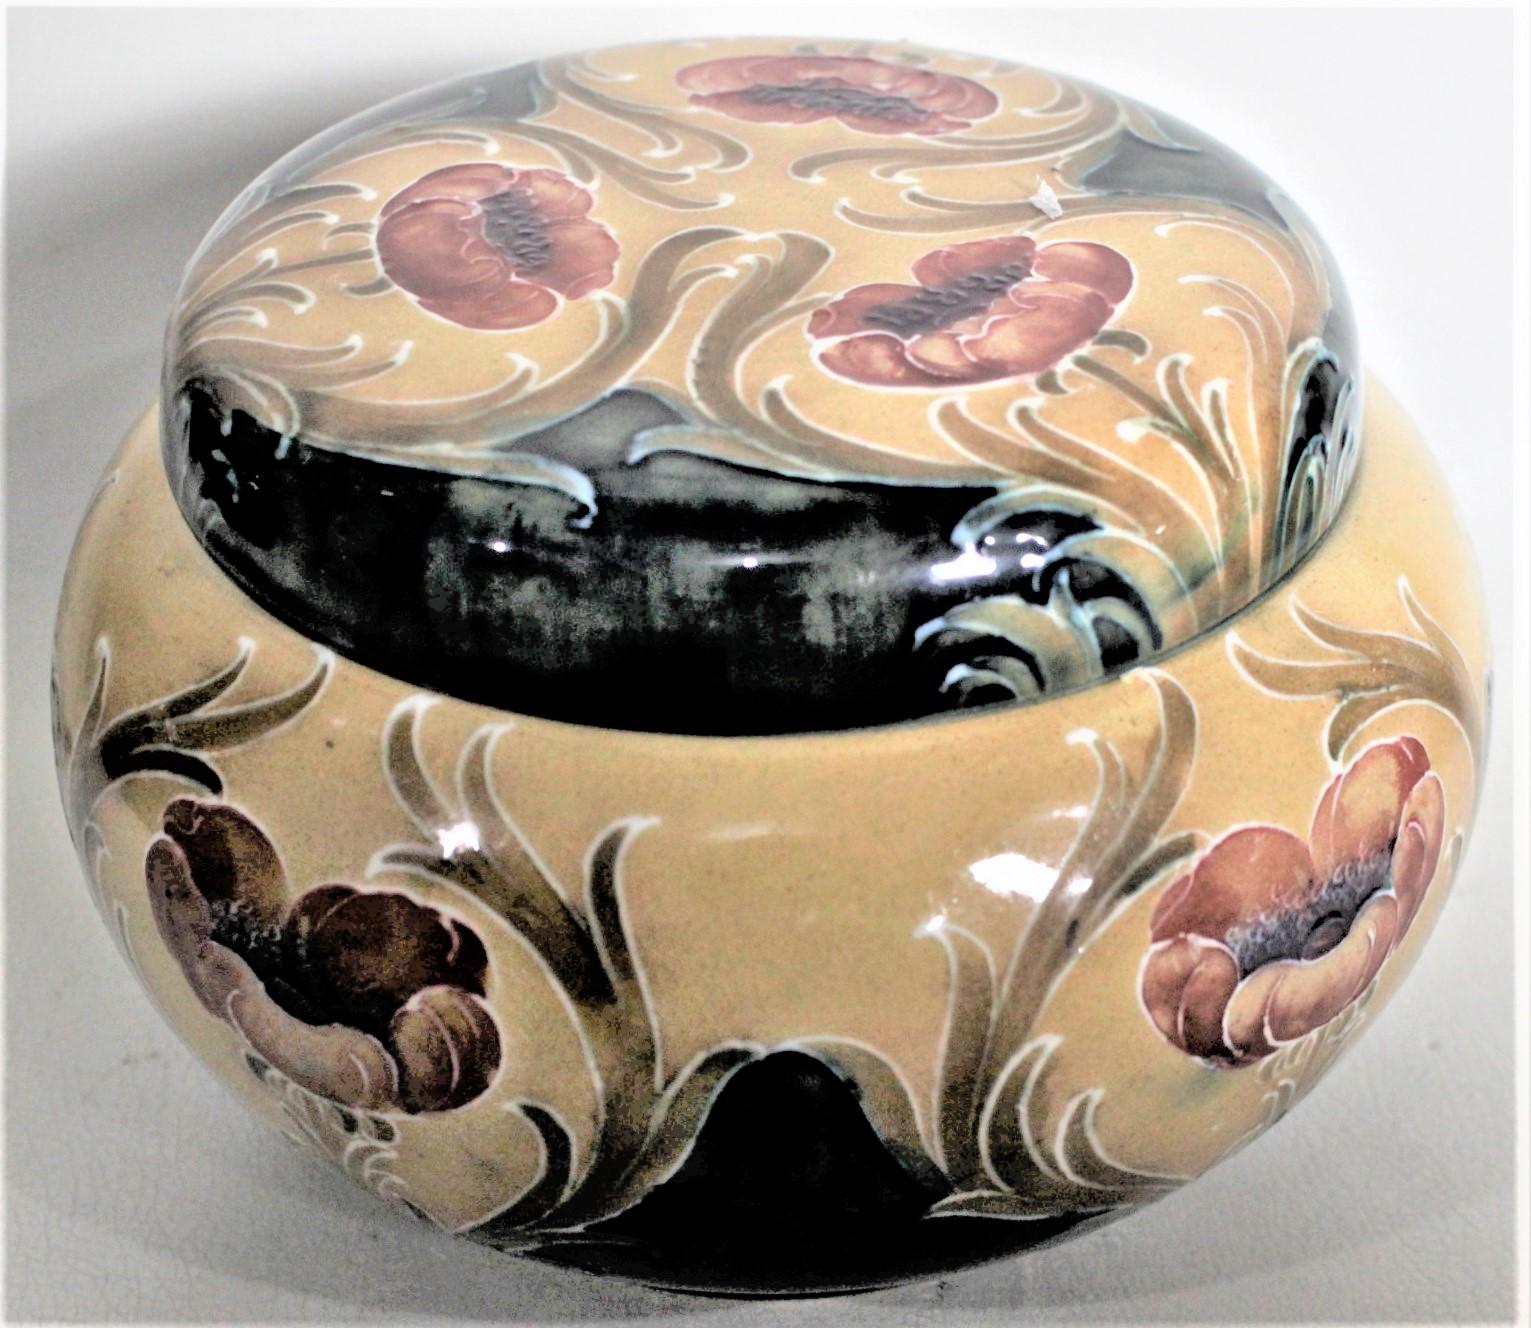 This antique art pottery covered tobacco or dresser jar was made by the James MacIntyre company of England, under the design direction of William Moorcroft, in circa 1890 in the period Victorian style. The jar is done in a deep mustard ground with